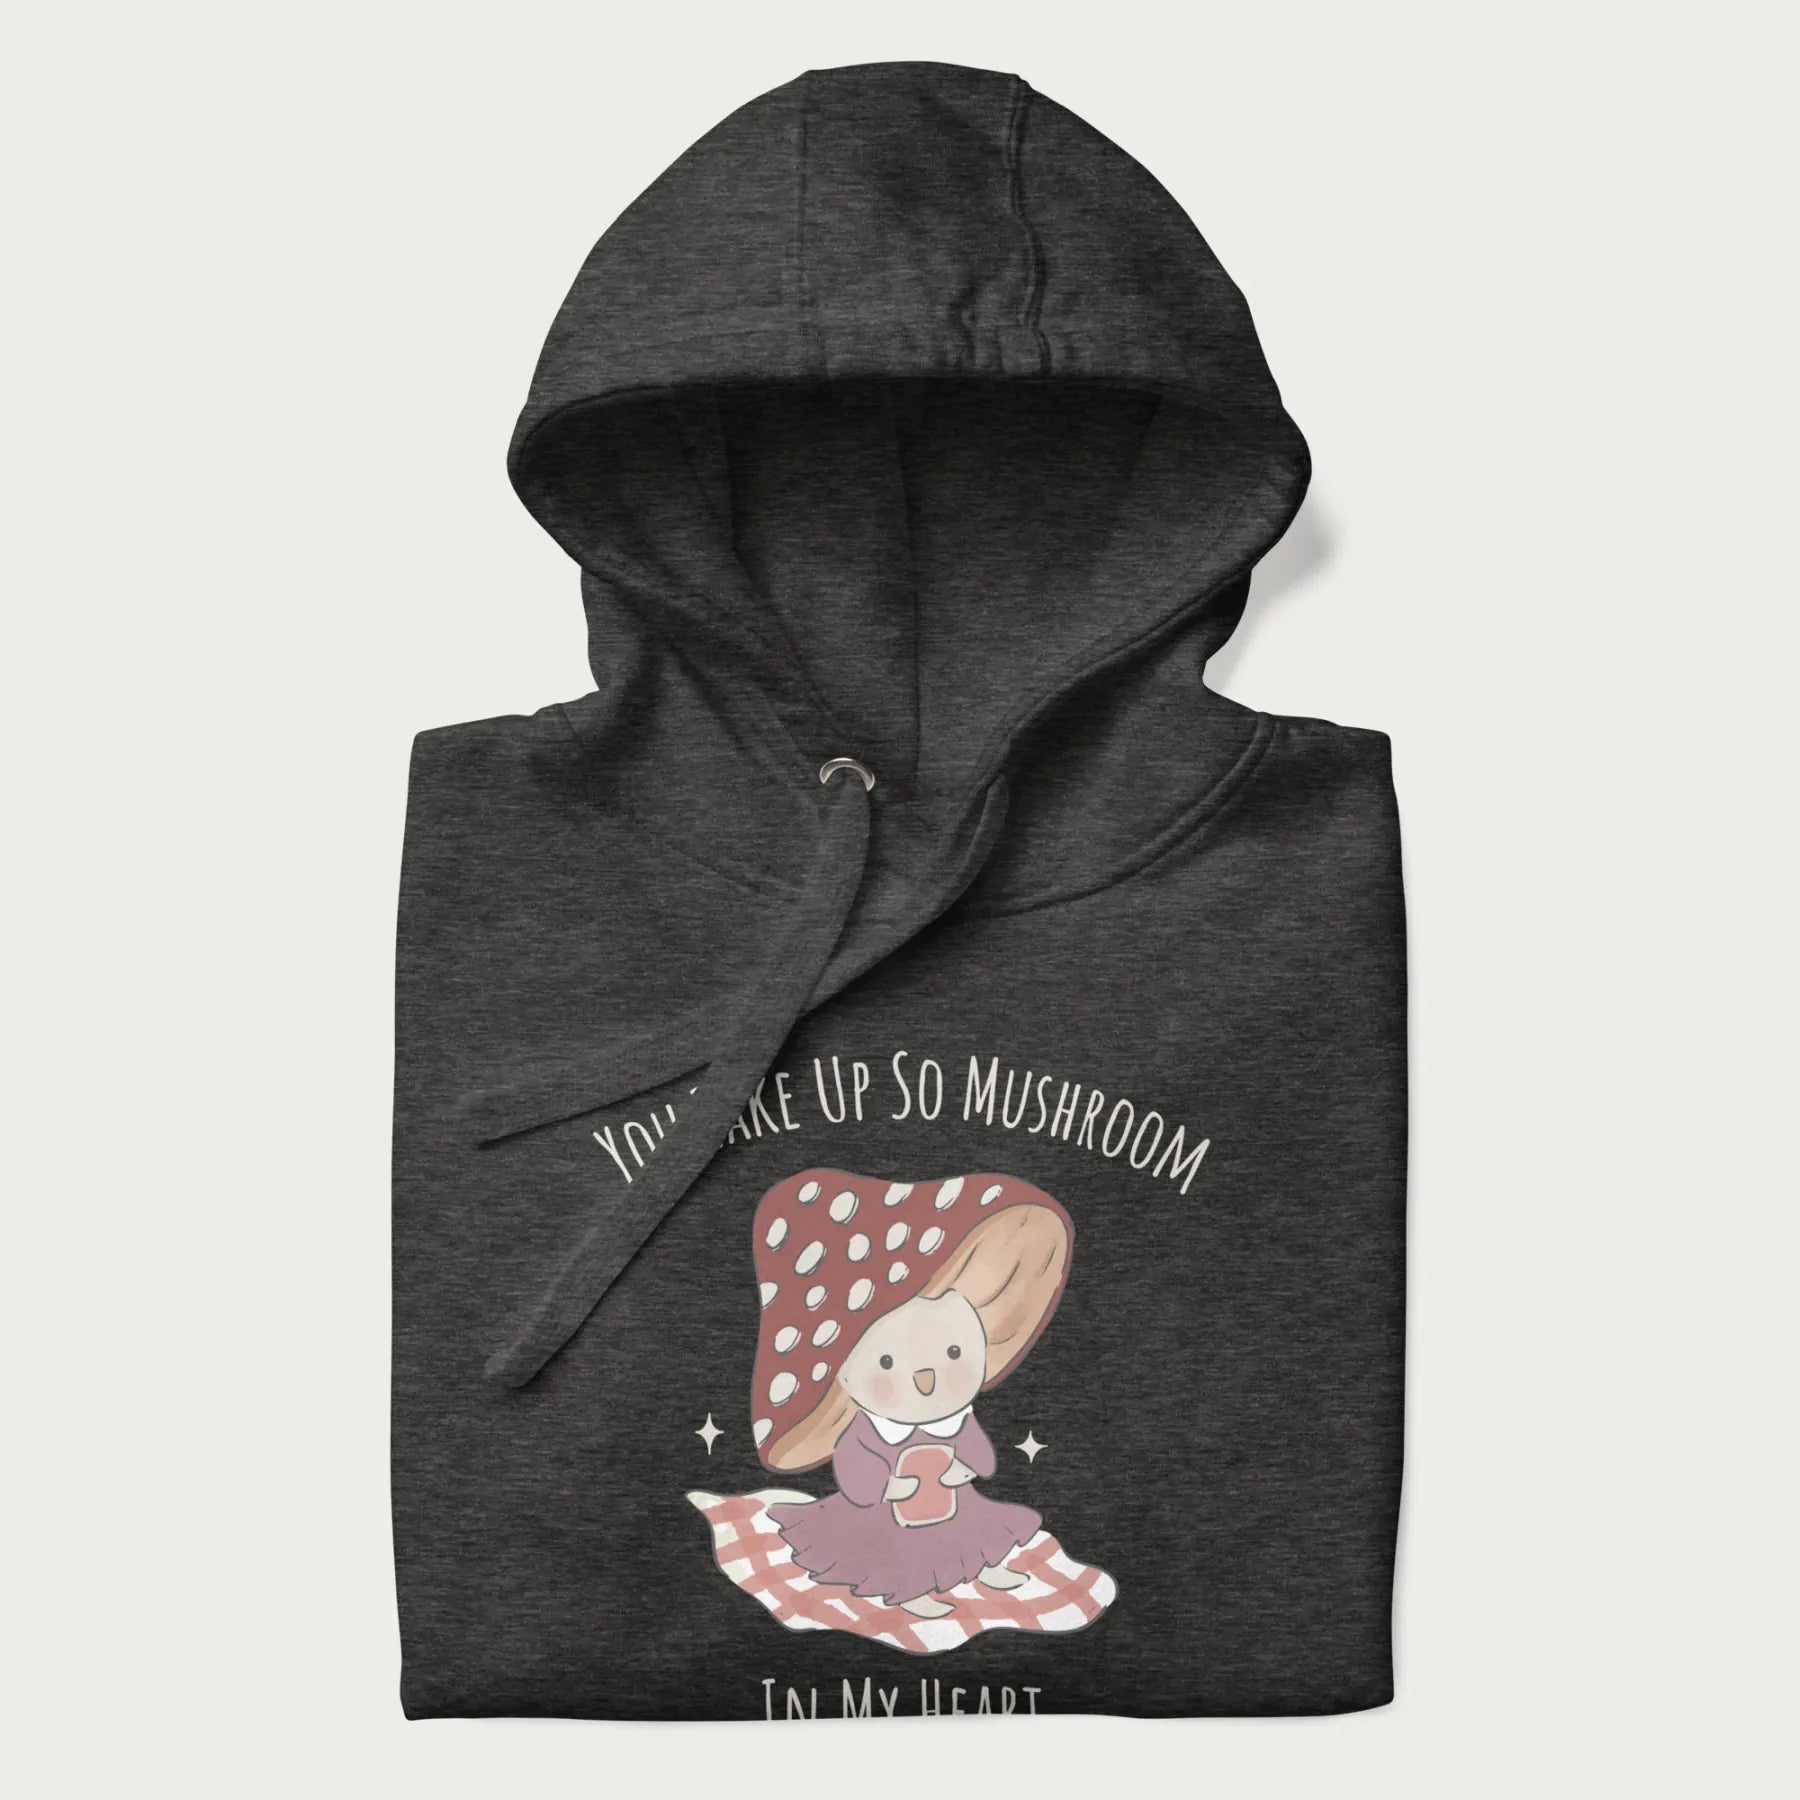 Folded dark grey hoodie with a cute mushroom character and the text 'You Take Up So Mushroom in My Heart'.